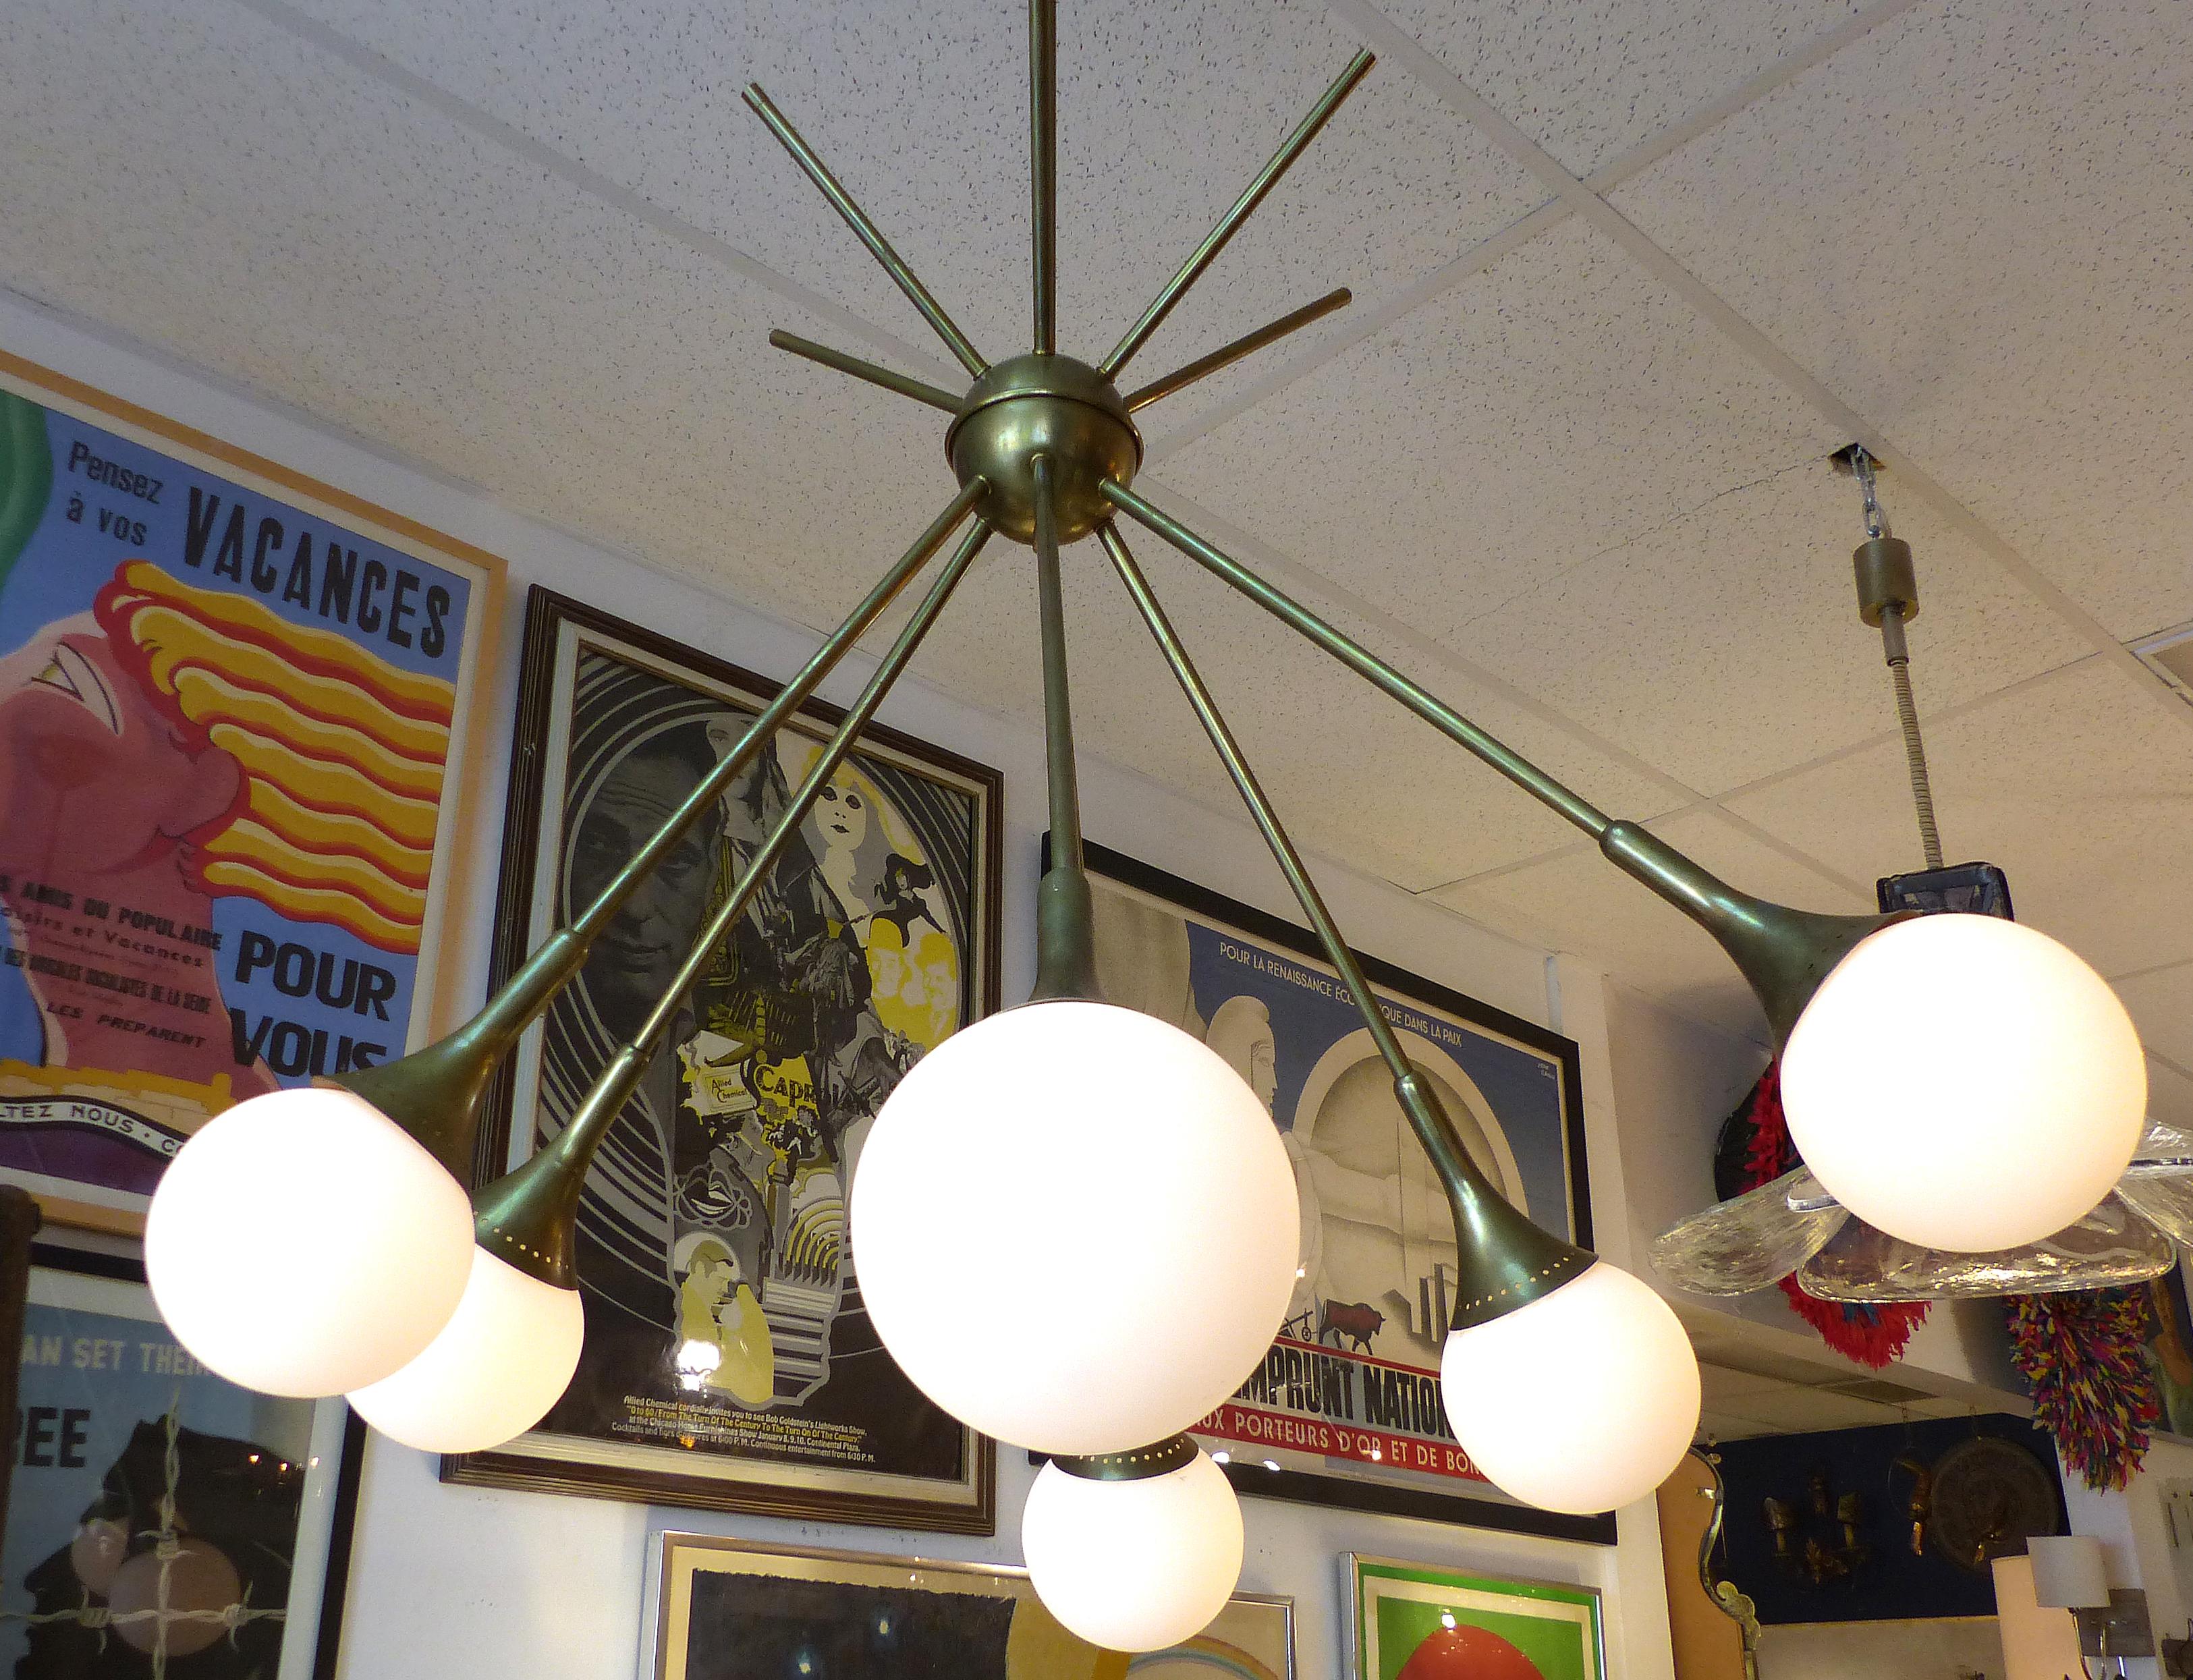 Mid-Century Modern Brass and Glass Sputnik Chandelier

Offered for sale is a Mid-Century Modern brass and glass globe six-light Sputnik style chandelier. The frosted white globes are irregularly positioned to create a light feeling with movement.